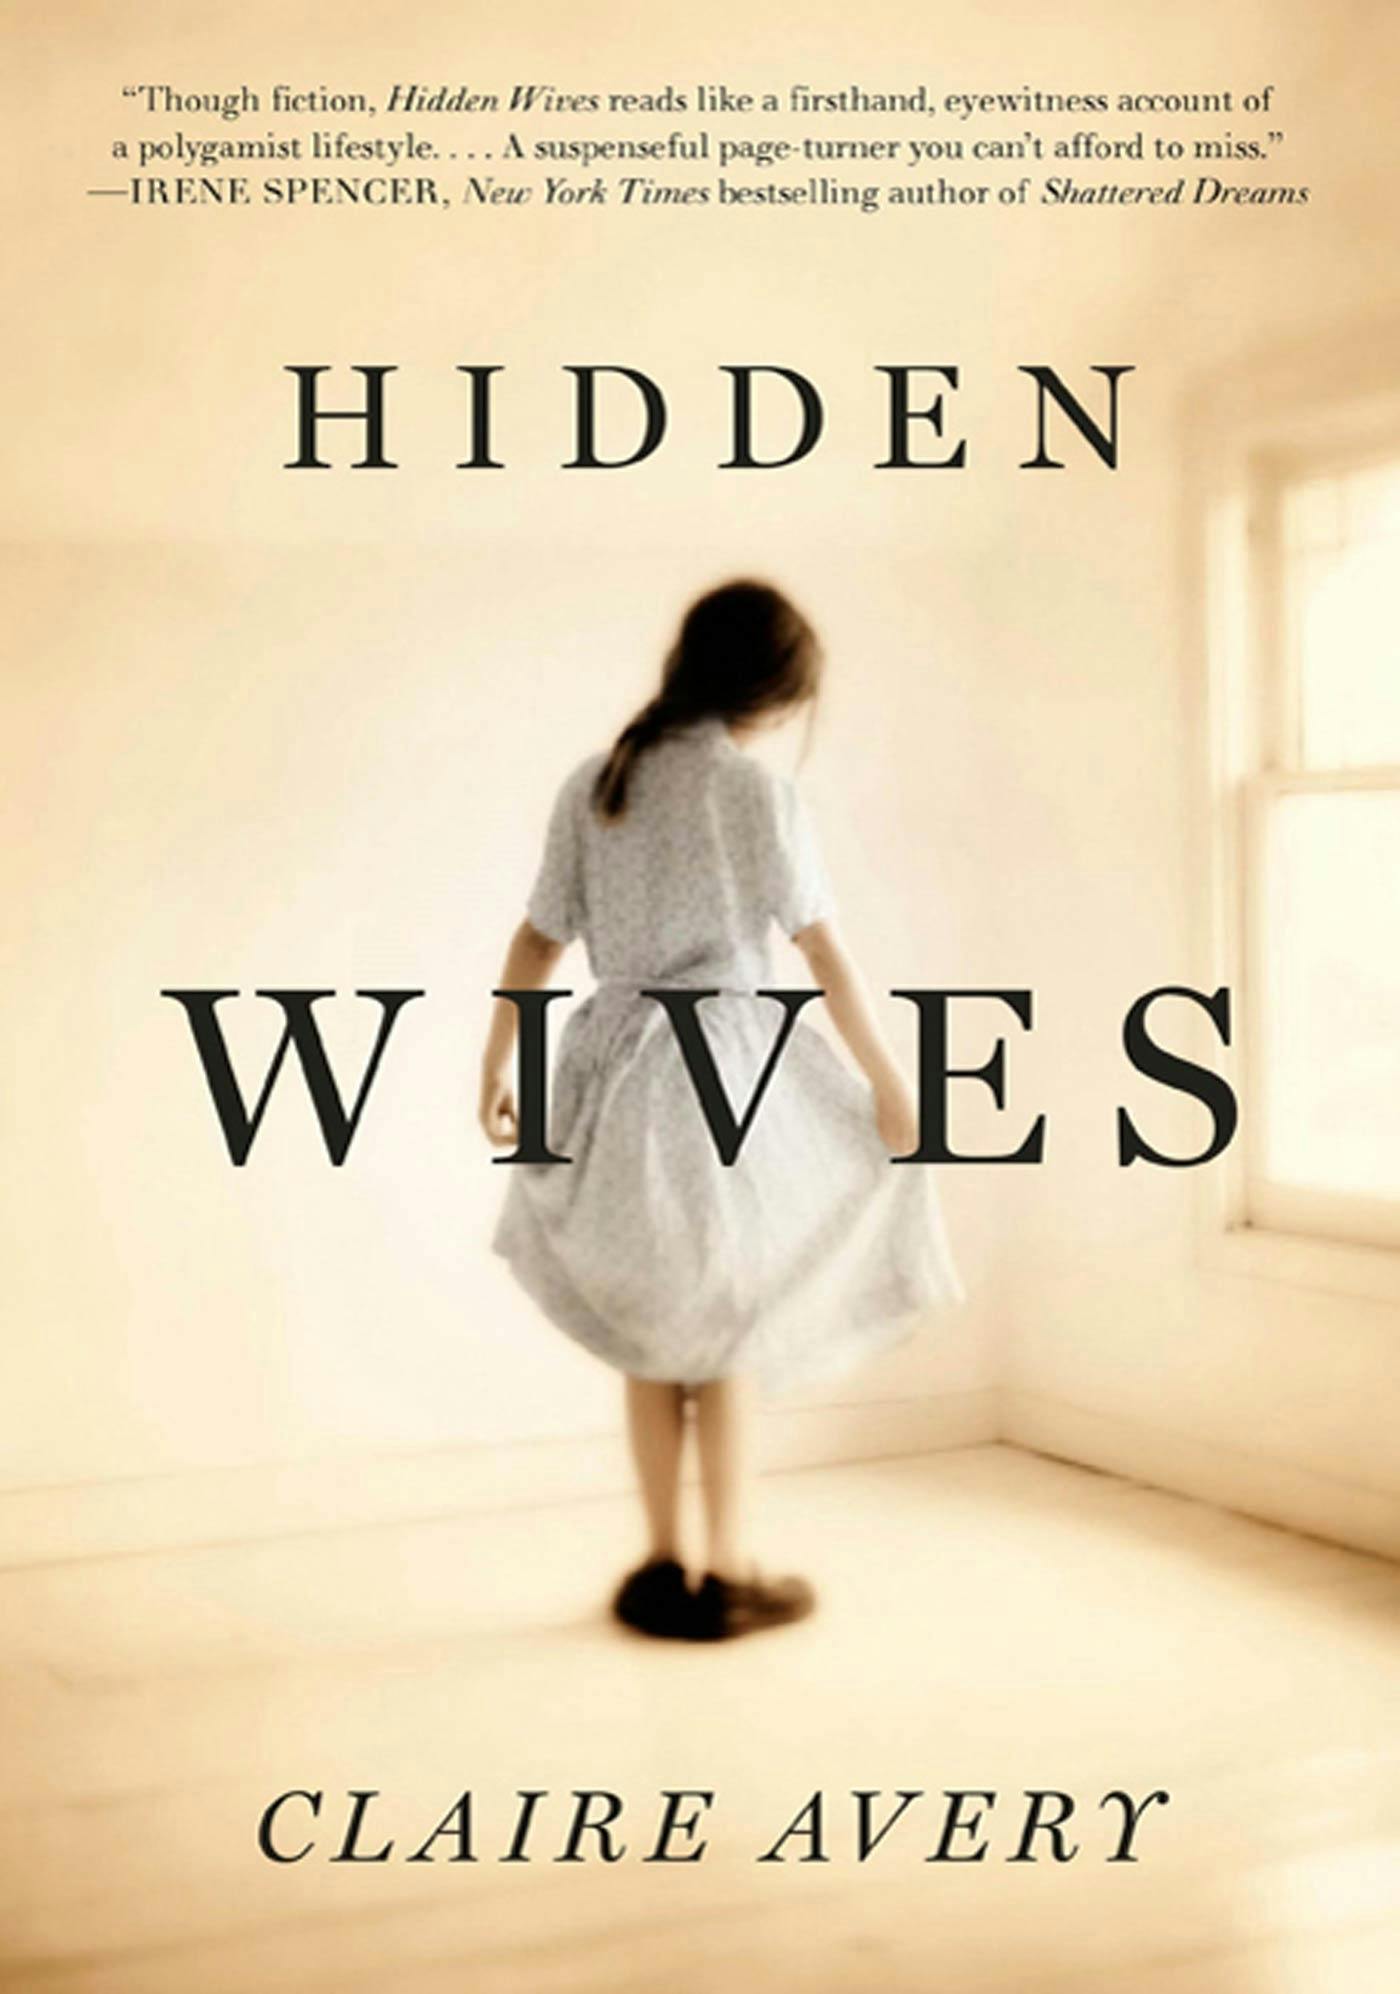 Cover for the book titled as: Hidden Wives